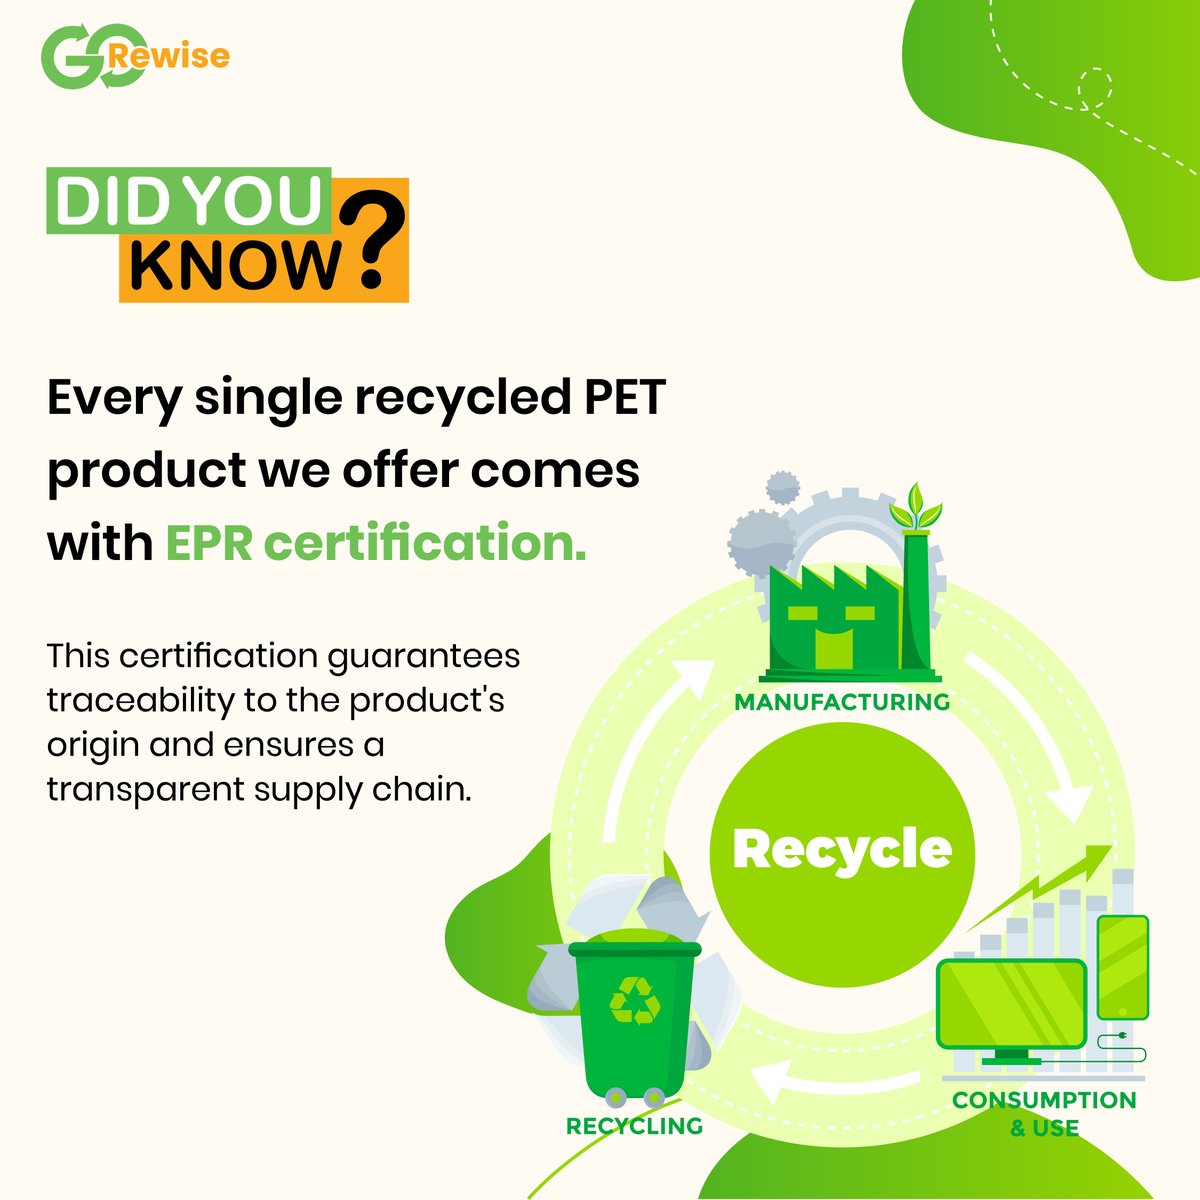 Transparency & accountability are at the core of our mission!

With guaranteed traceability & a transparent supply chain, you make a conscious choice for sustainability.

Step up to create a greener future & make a difference!

#GoRewise #EPRCertification #rPET #circulareconomy